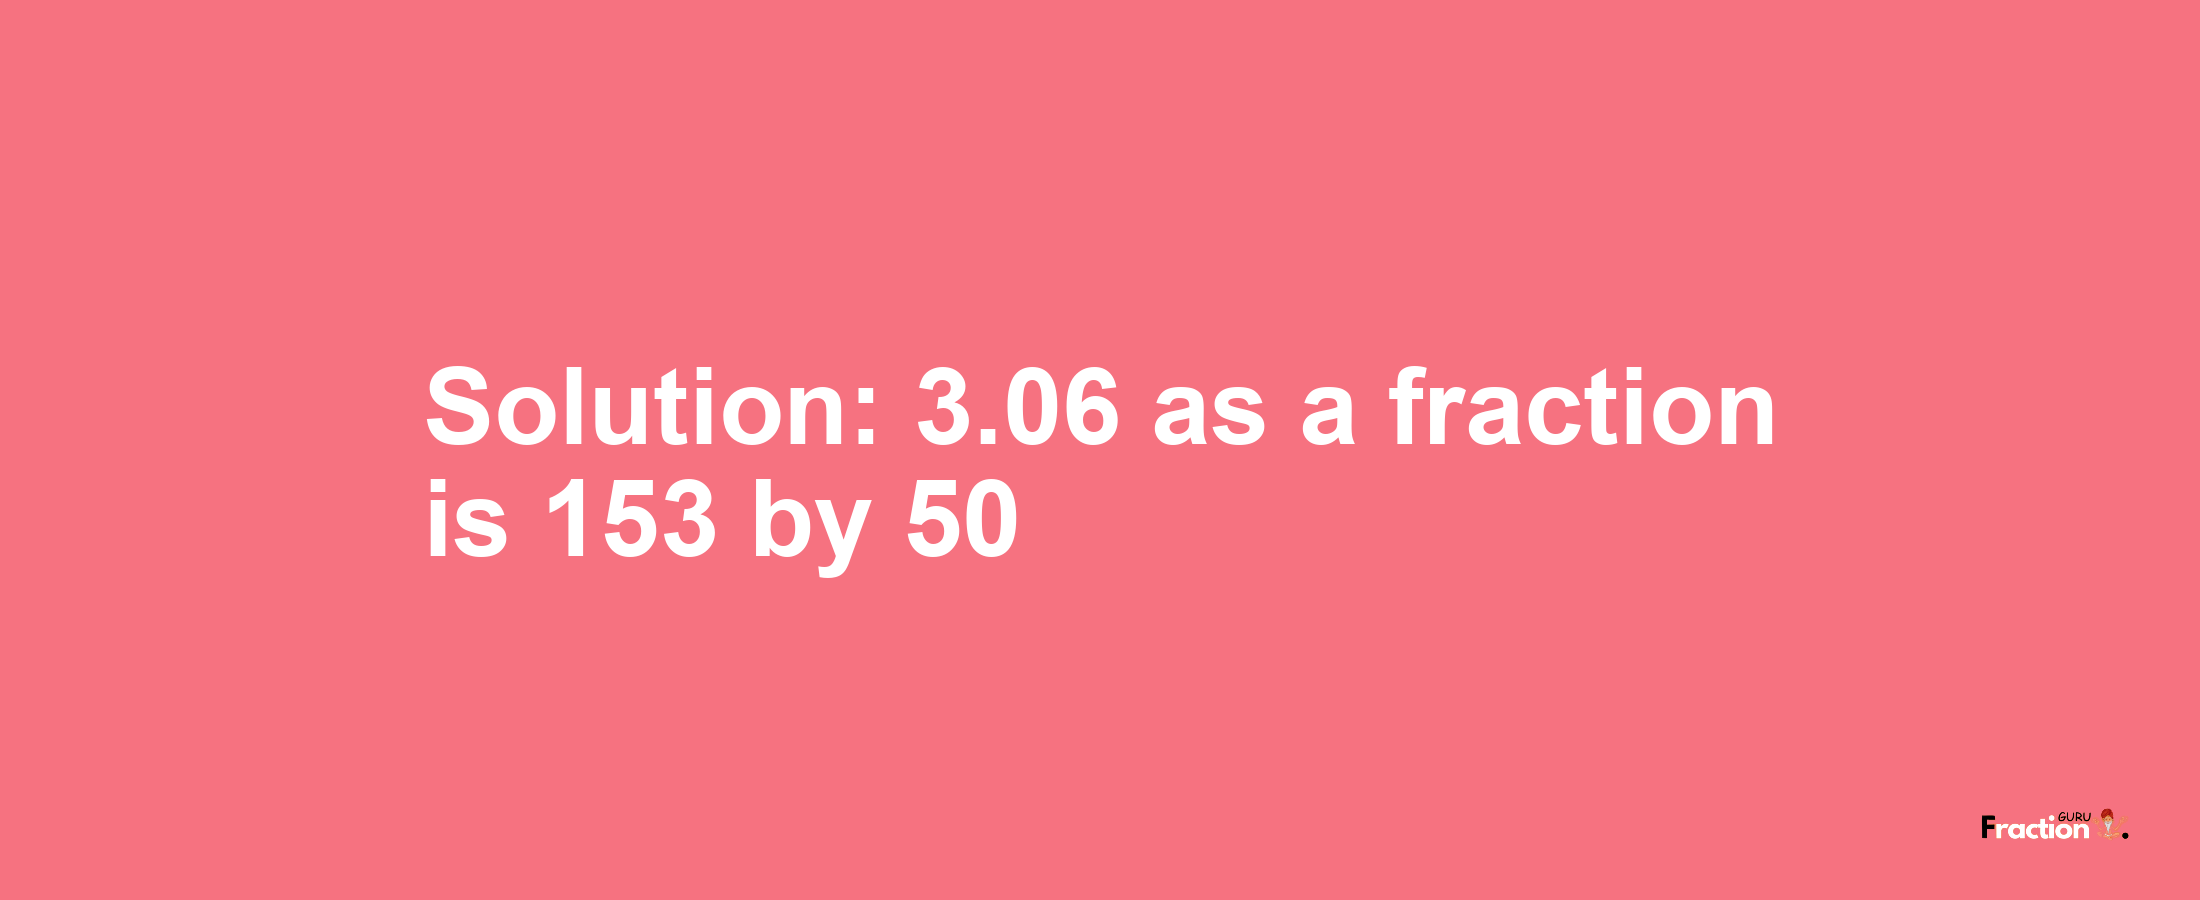 Solution:3.06 as a fraction is 153/50